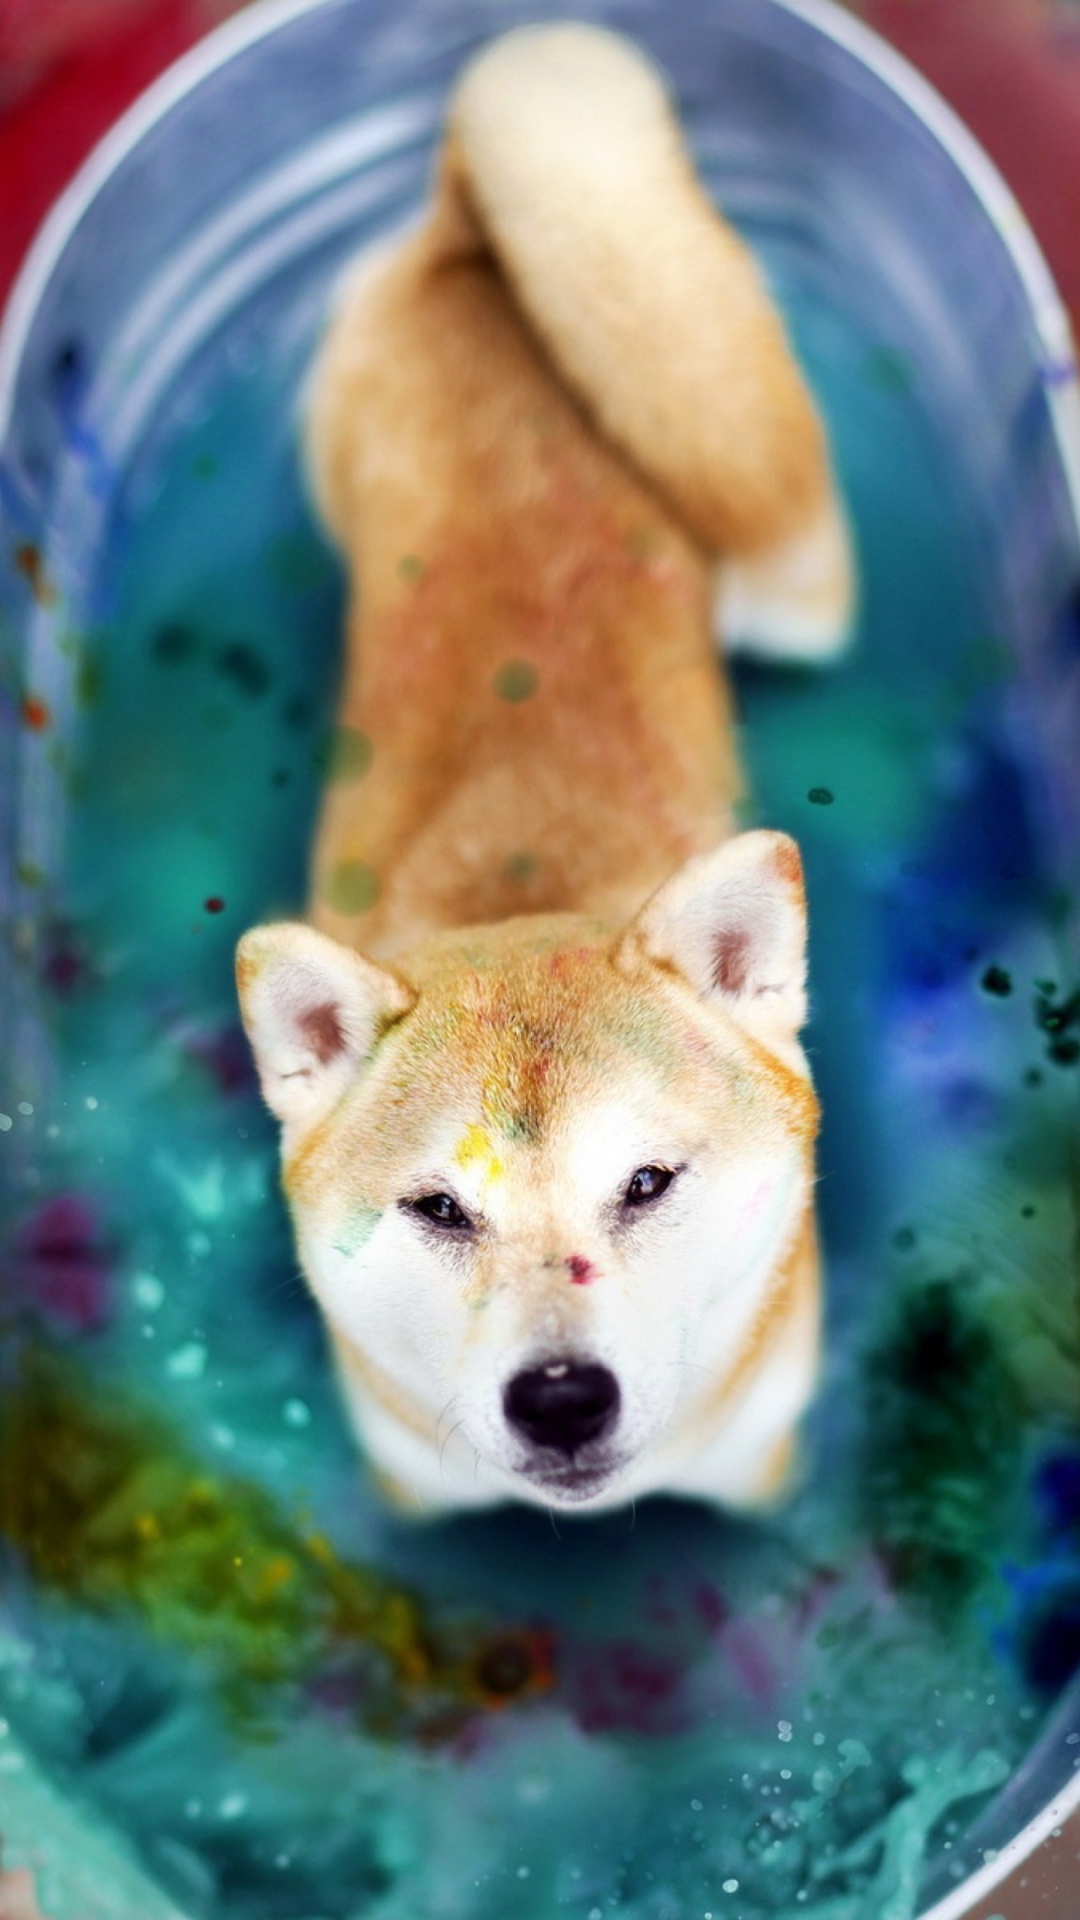 Dog And Colors wallpaper 1080x1920